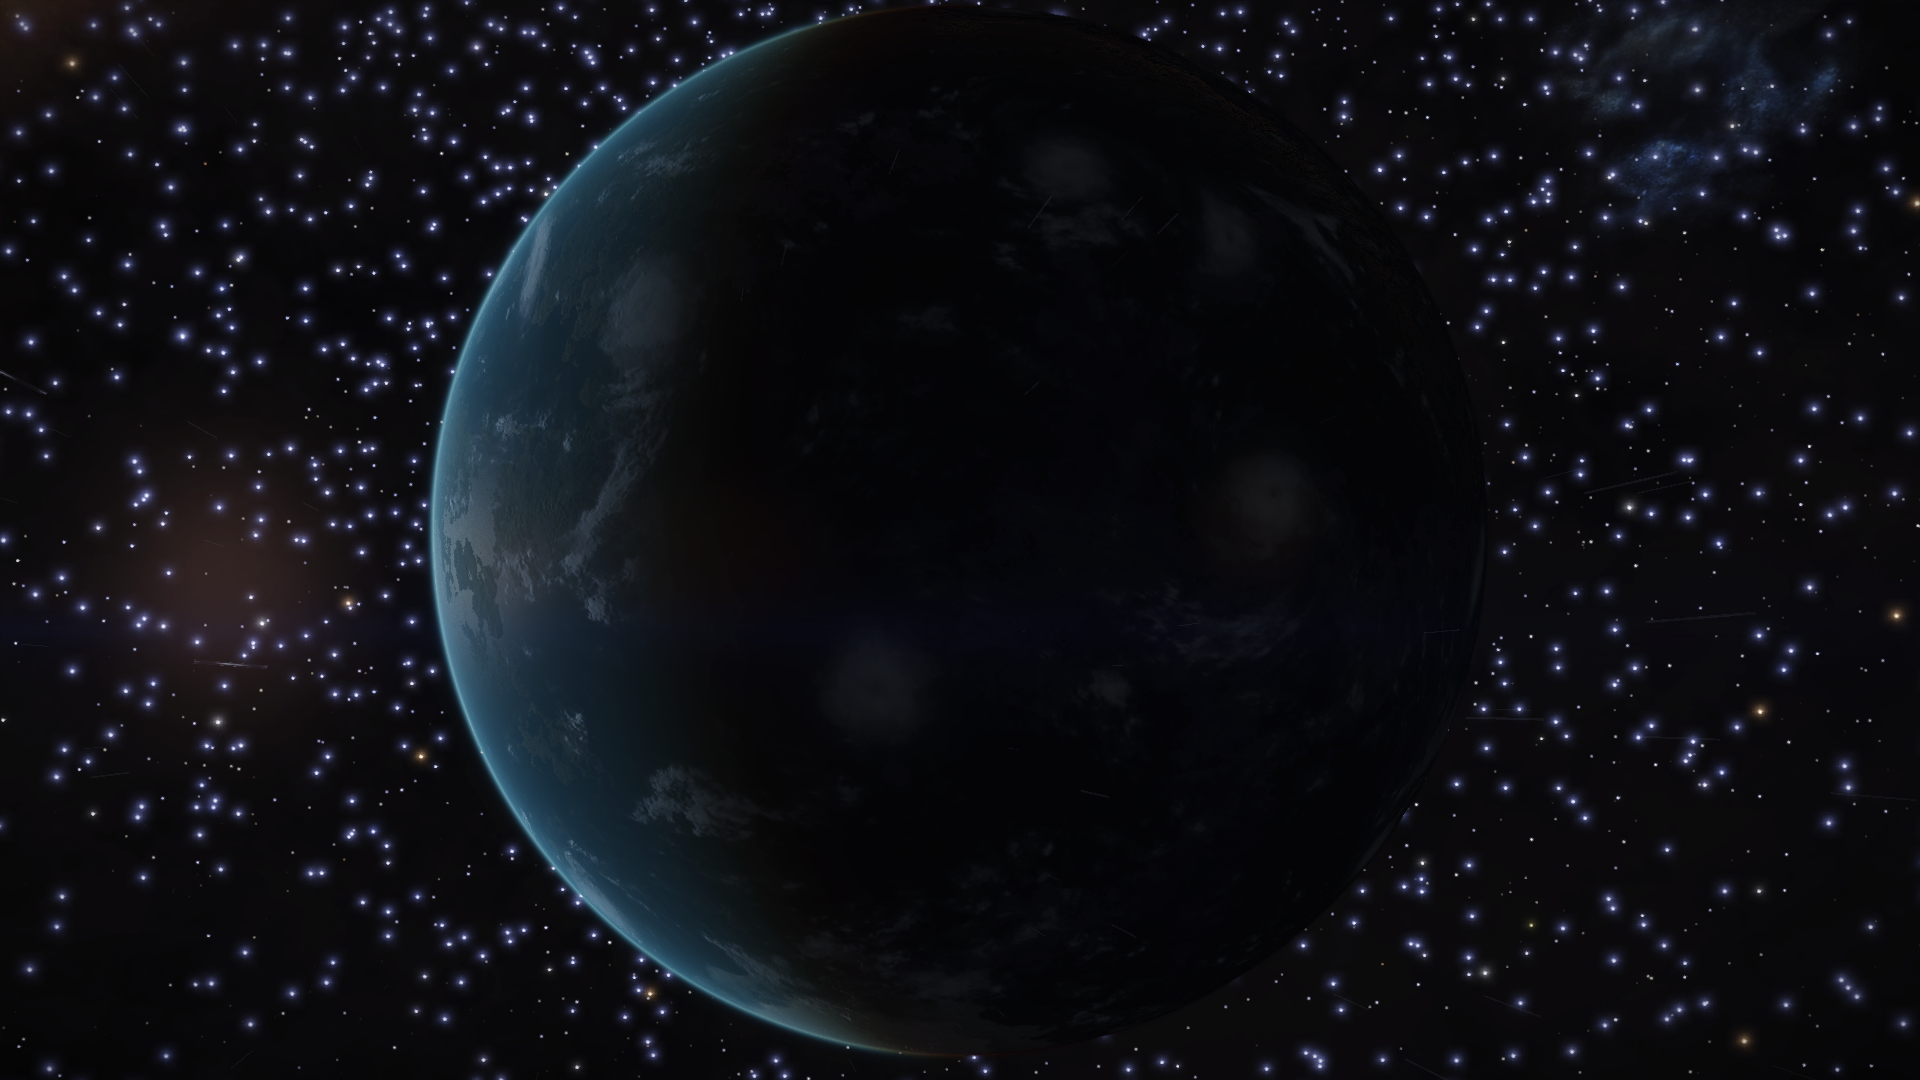 No, this is a different ELW